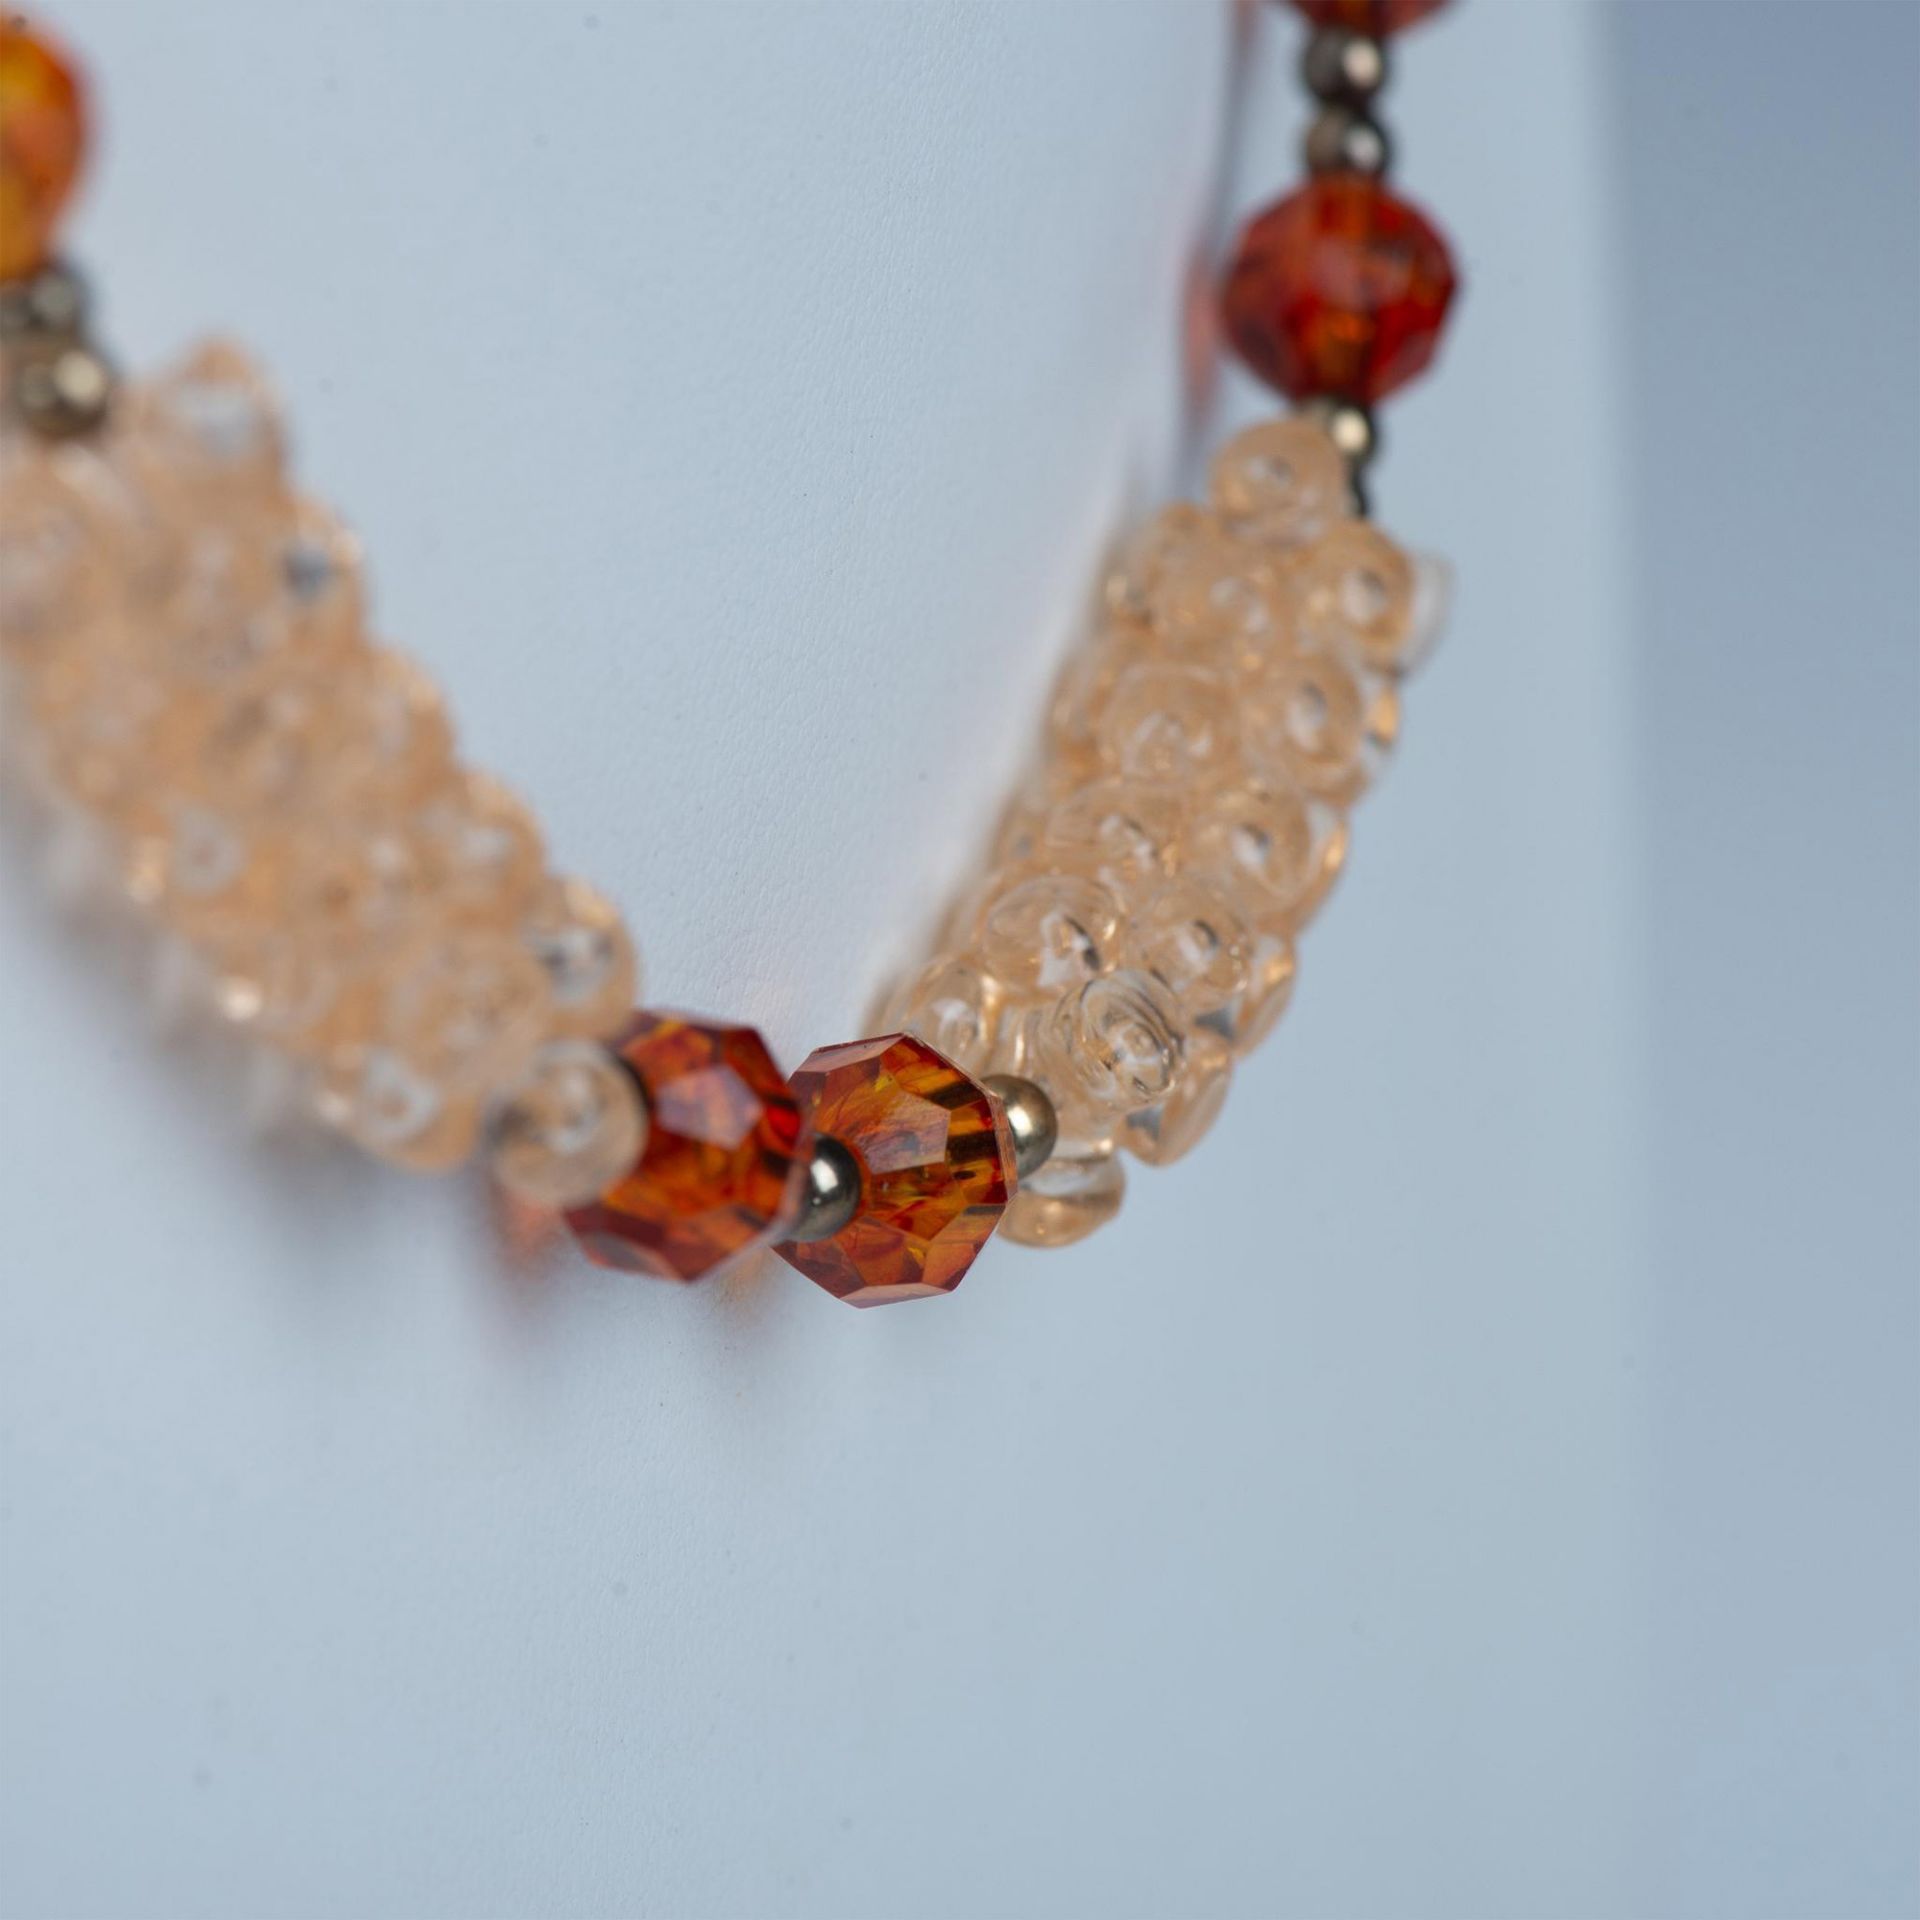 Cute Peach and Amber Colored Bead Necklace - Bild 2 aus 3